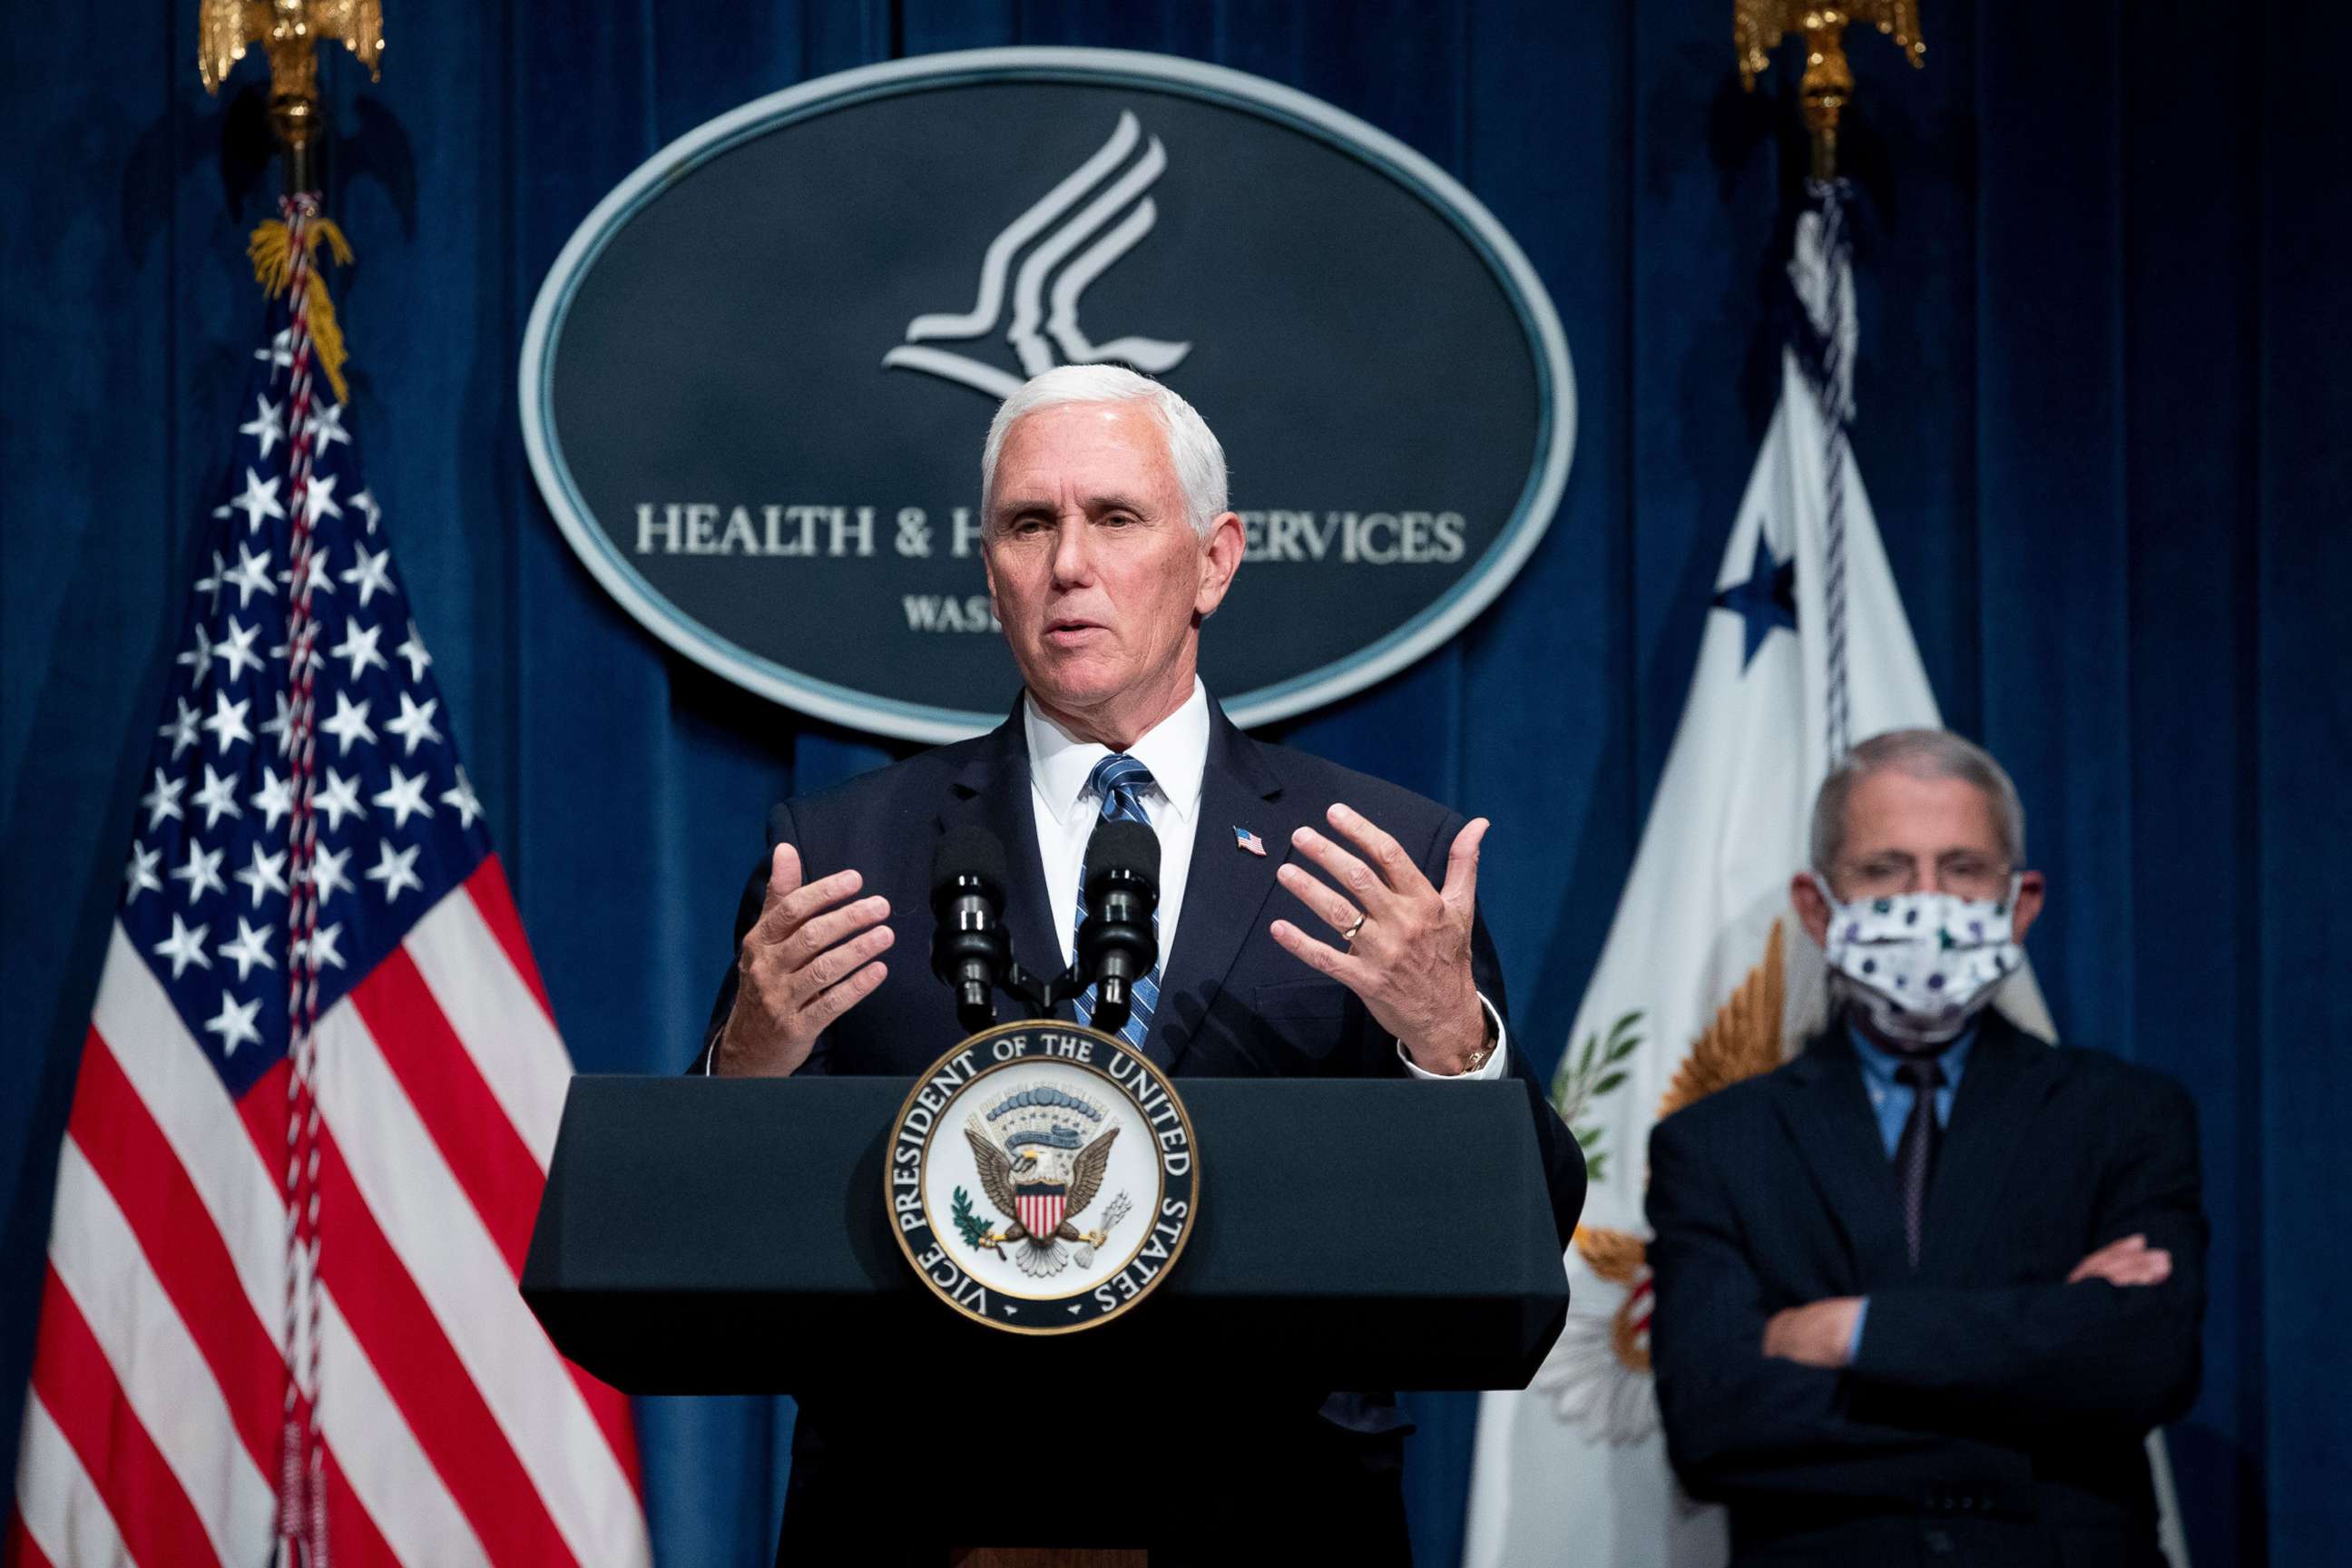 Vice President Mike Pence participates in a White House Coronavirus Task Force briefing as National Institute of Allergy and Infectious Diseases Director Anthony Fauci looks on at the Department of Health and Human Services in Washington, June 26, 2020.